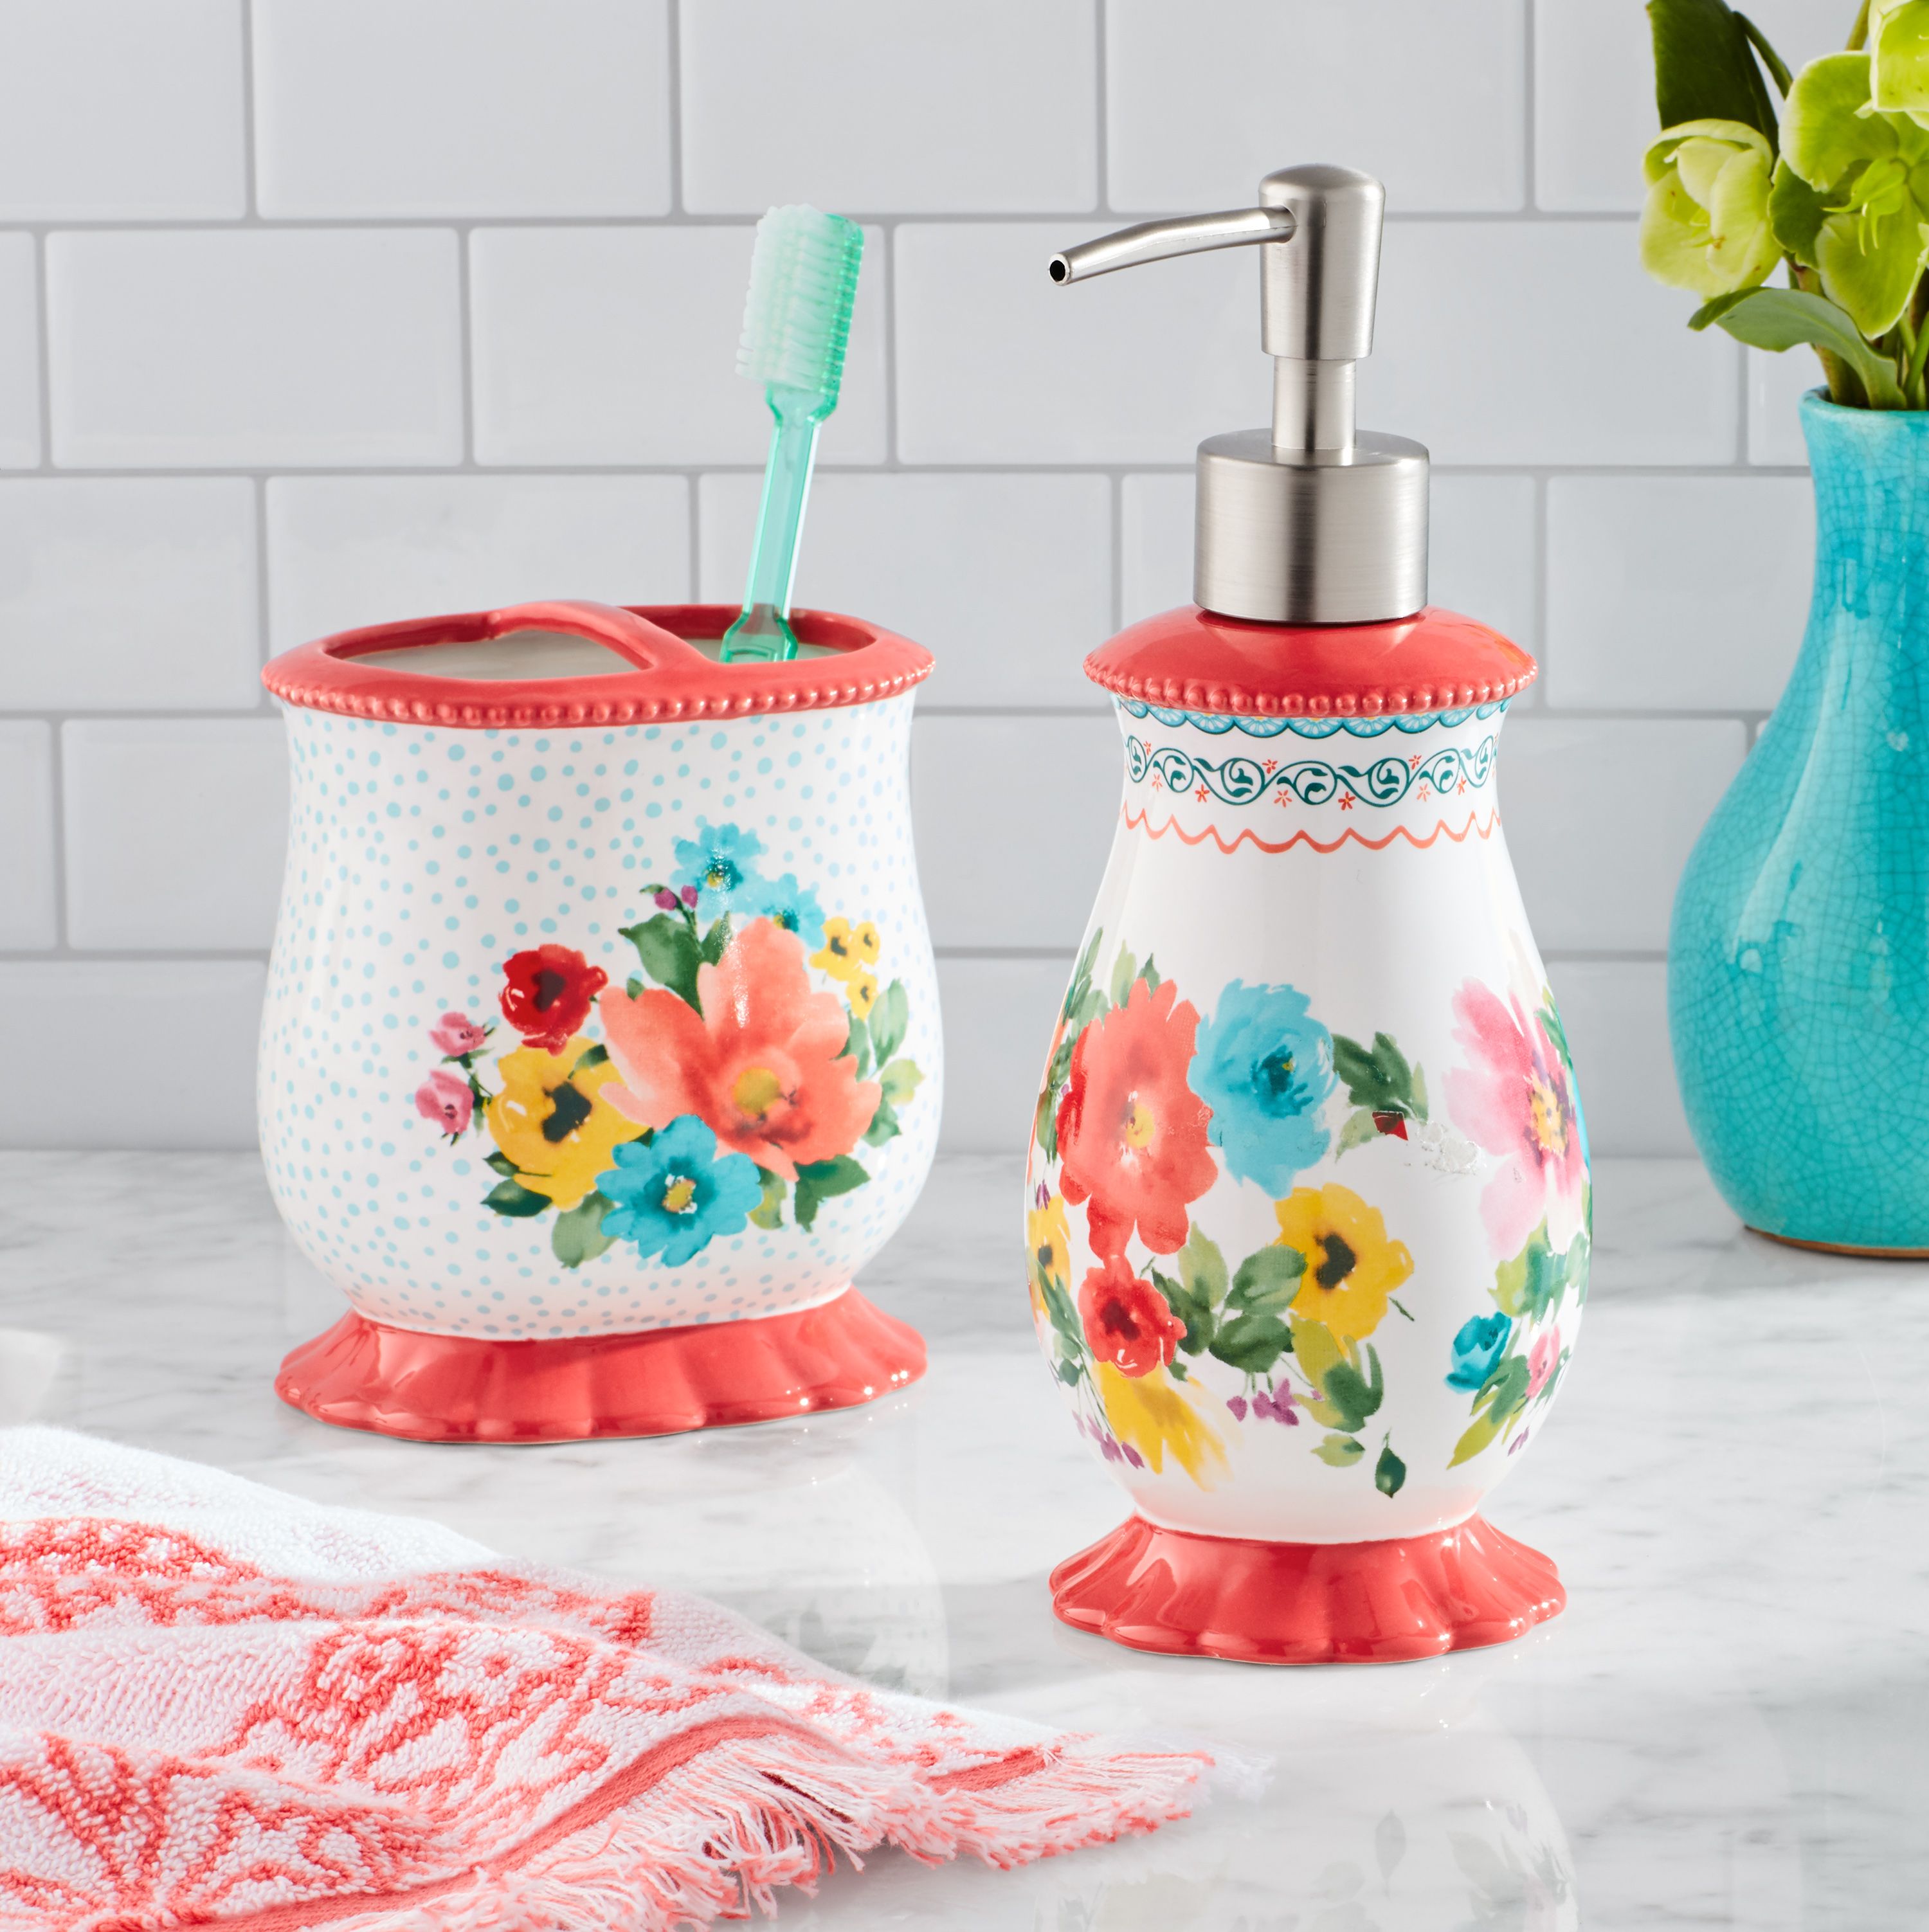 The Pioneer Woman Bath Collection Is on Sale Staring at Just $5